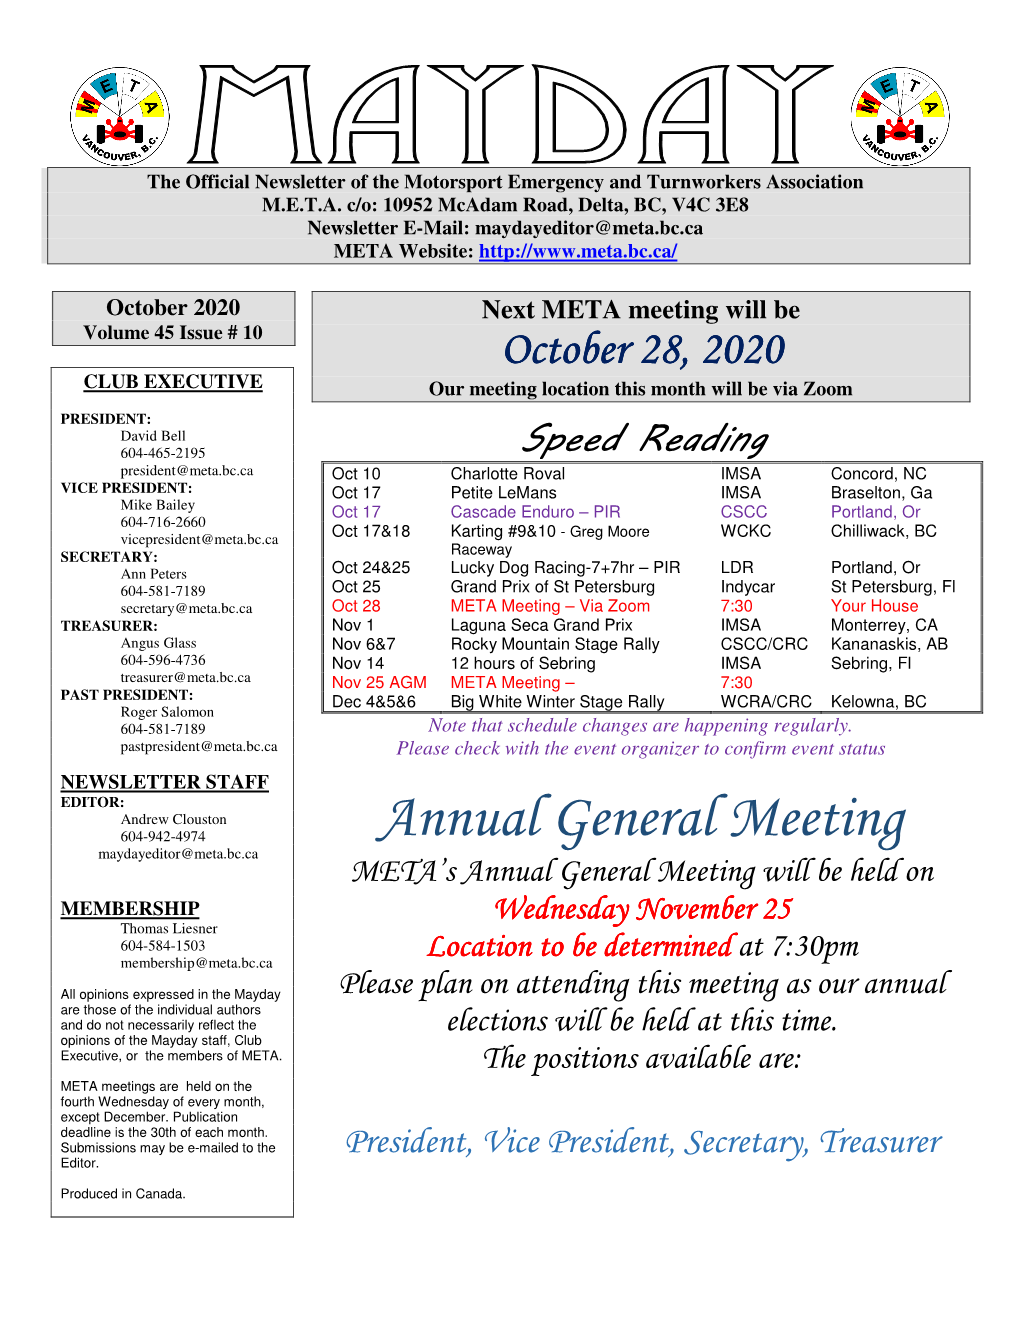 October 2020 Next META Meeting Will Be Volume 45 Issue # 10 October 2828,, 2020 CLUB EXECUTIVE Our Meeting Location This Month Will Be Via Zoom